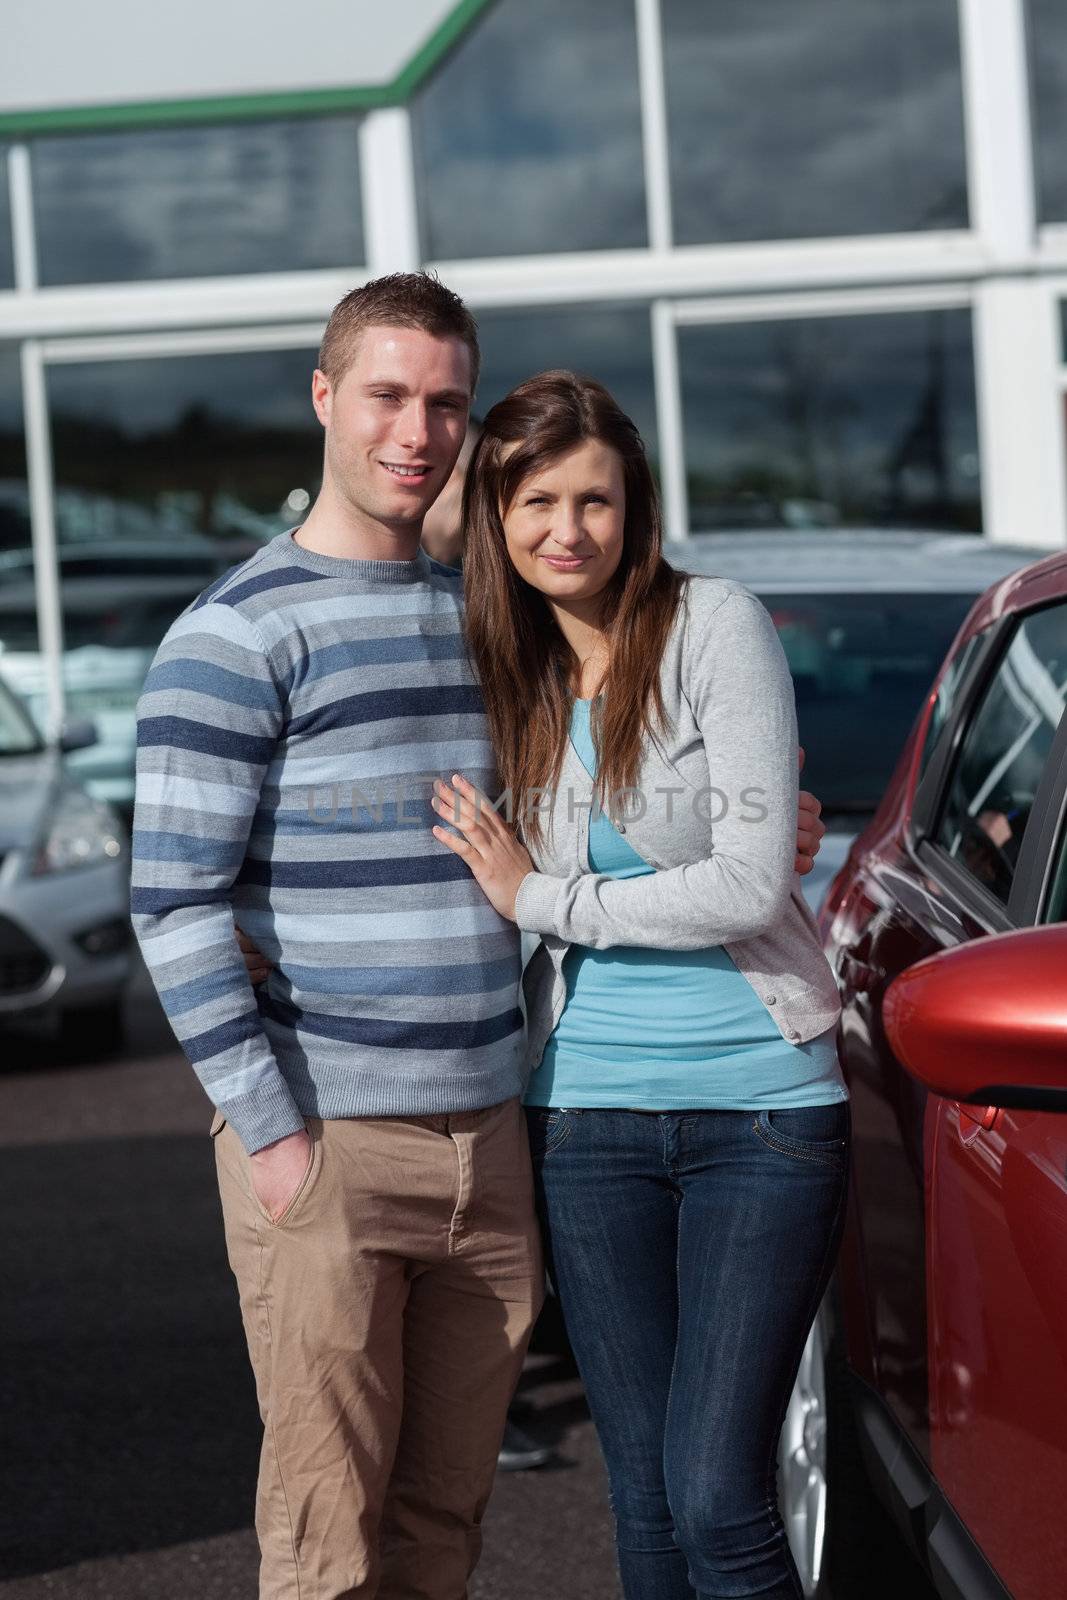 Couple holding tight while standing next to a car in a car park